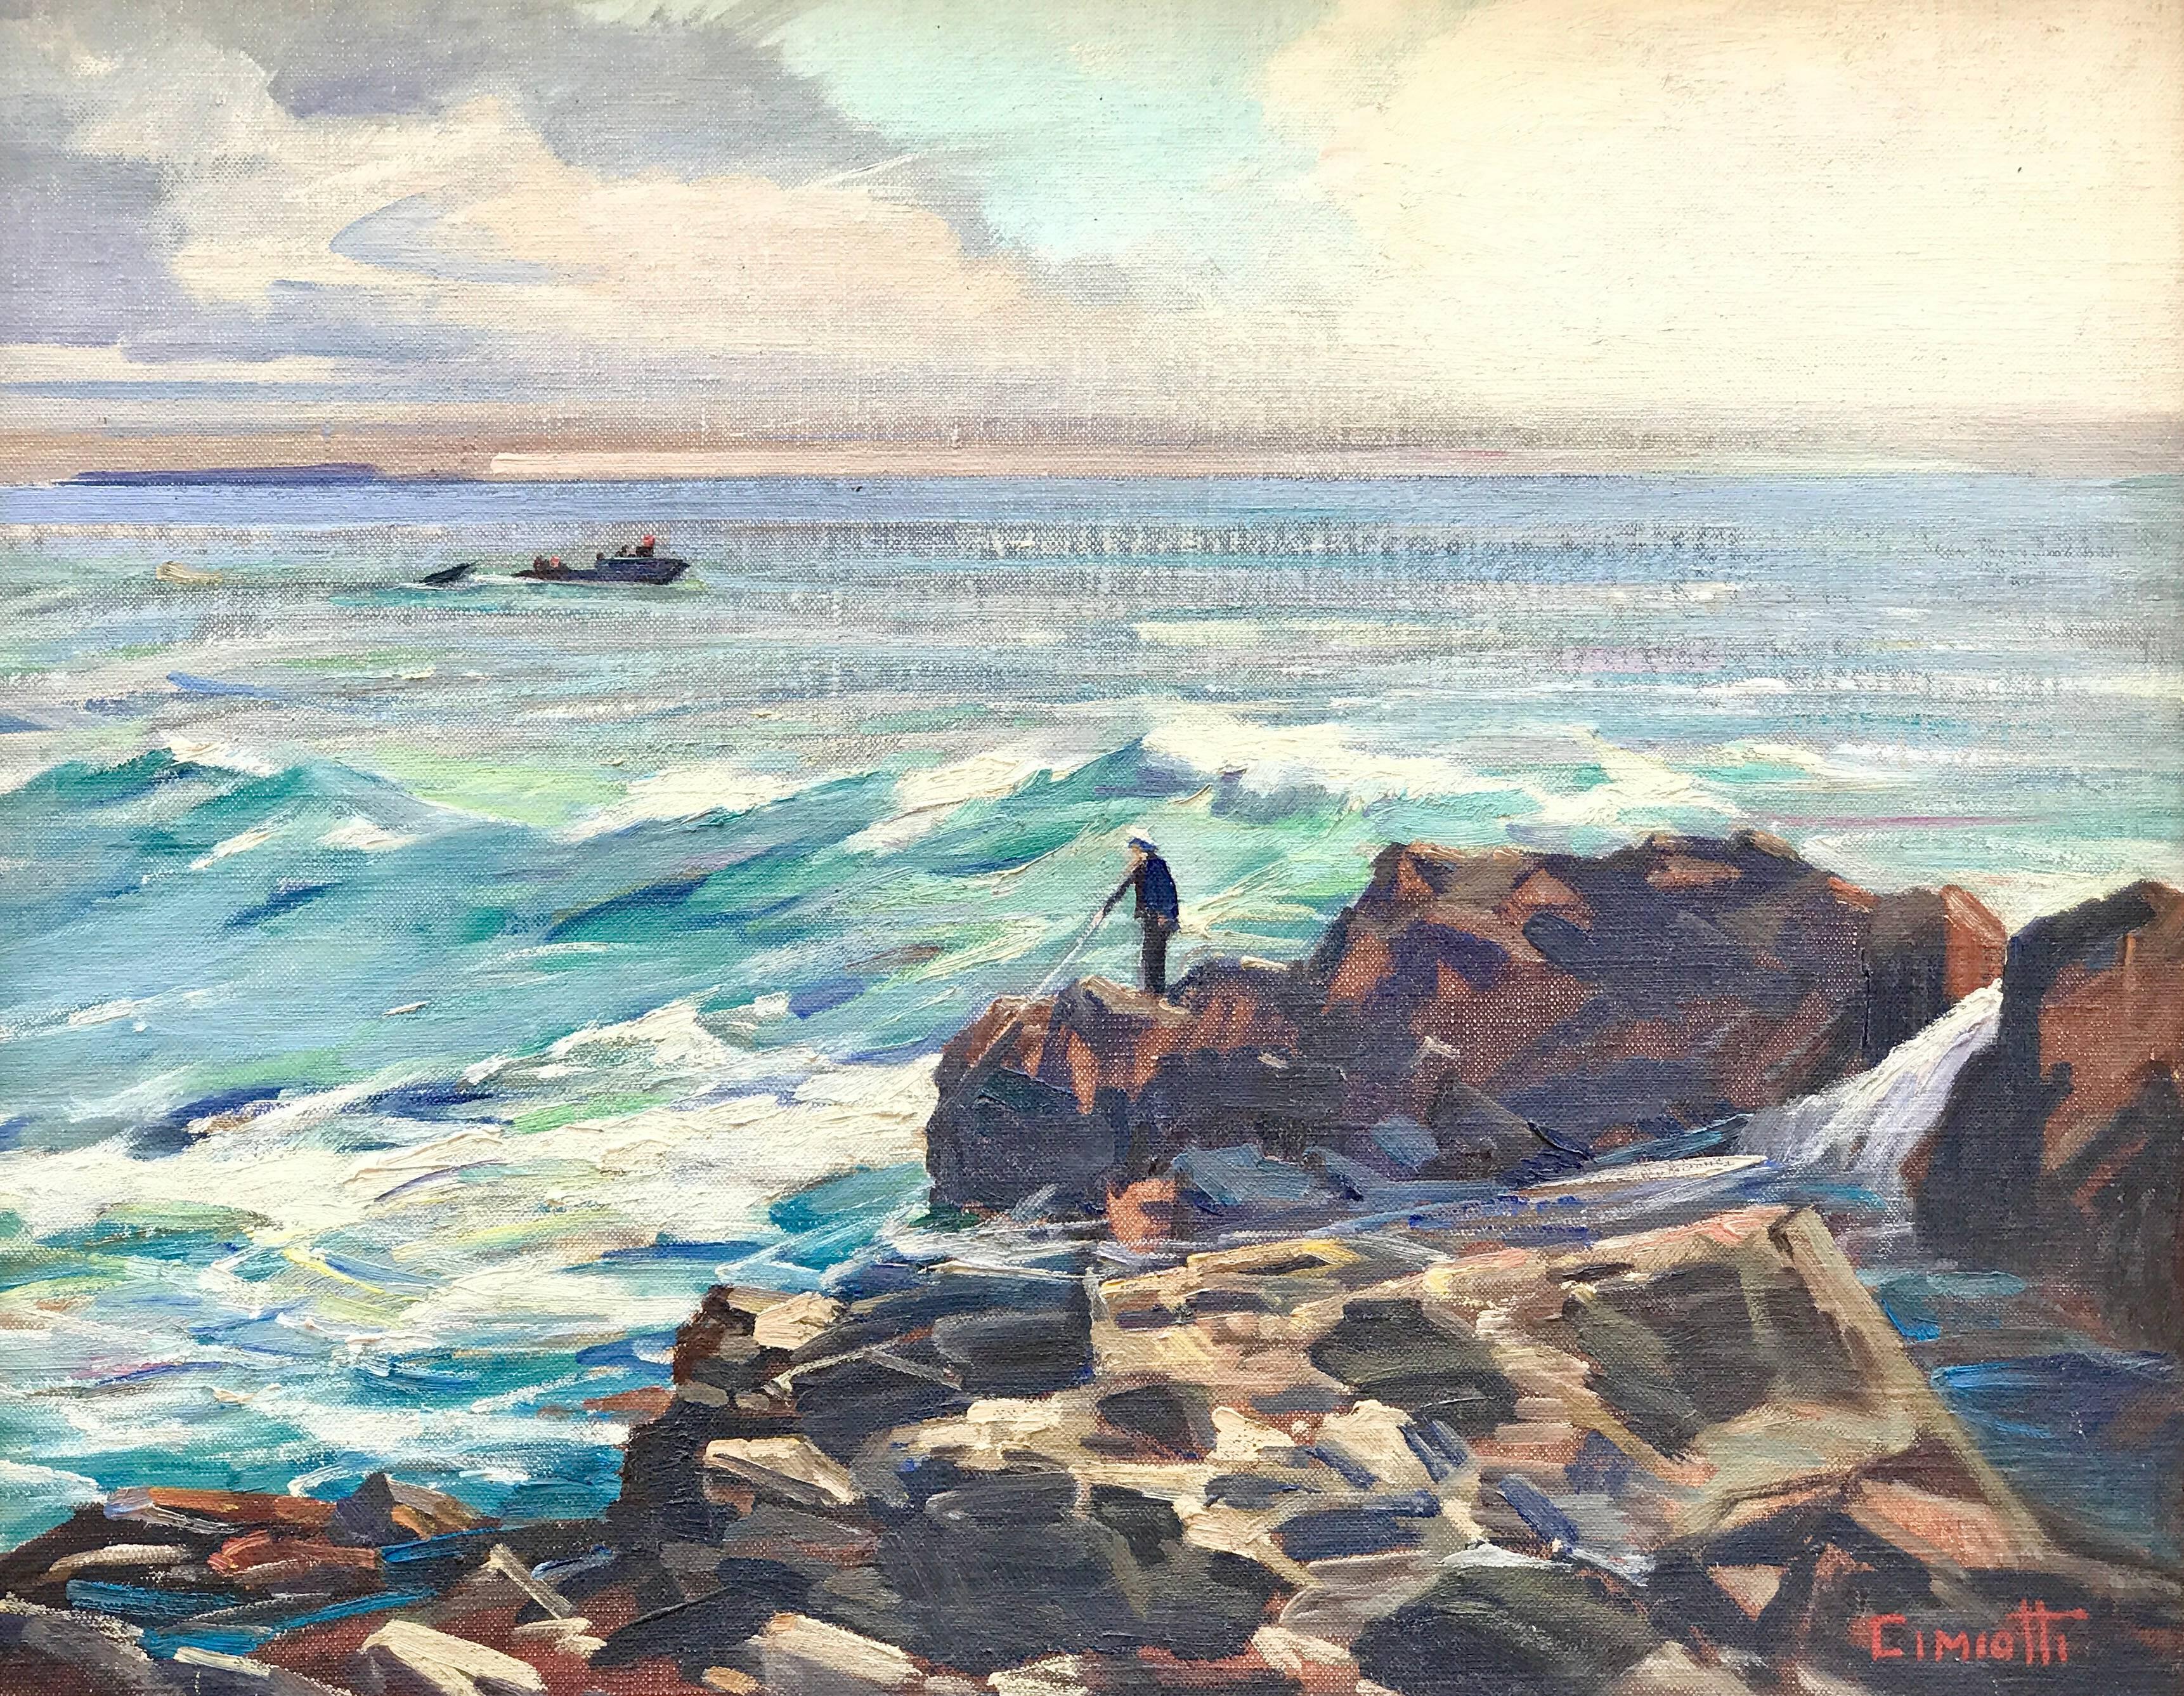 Gustave Cimiotti Jr. Landscape Painting - "The Fisherman, Maine"